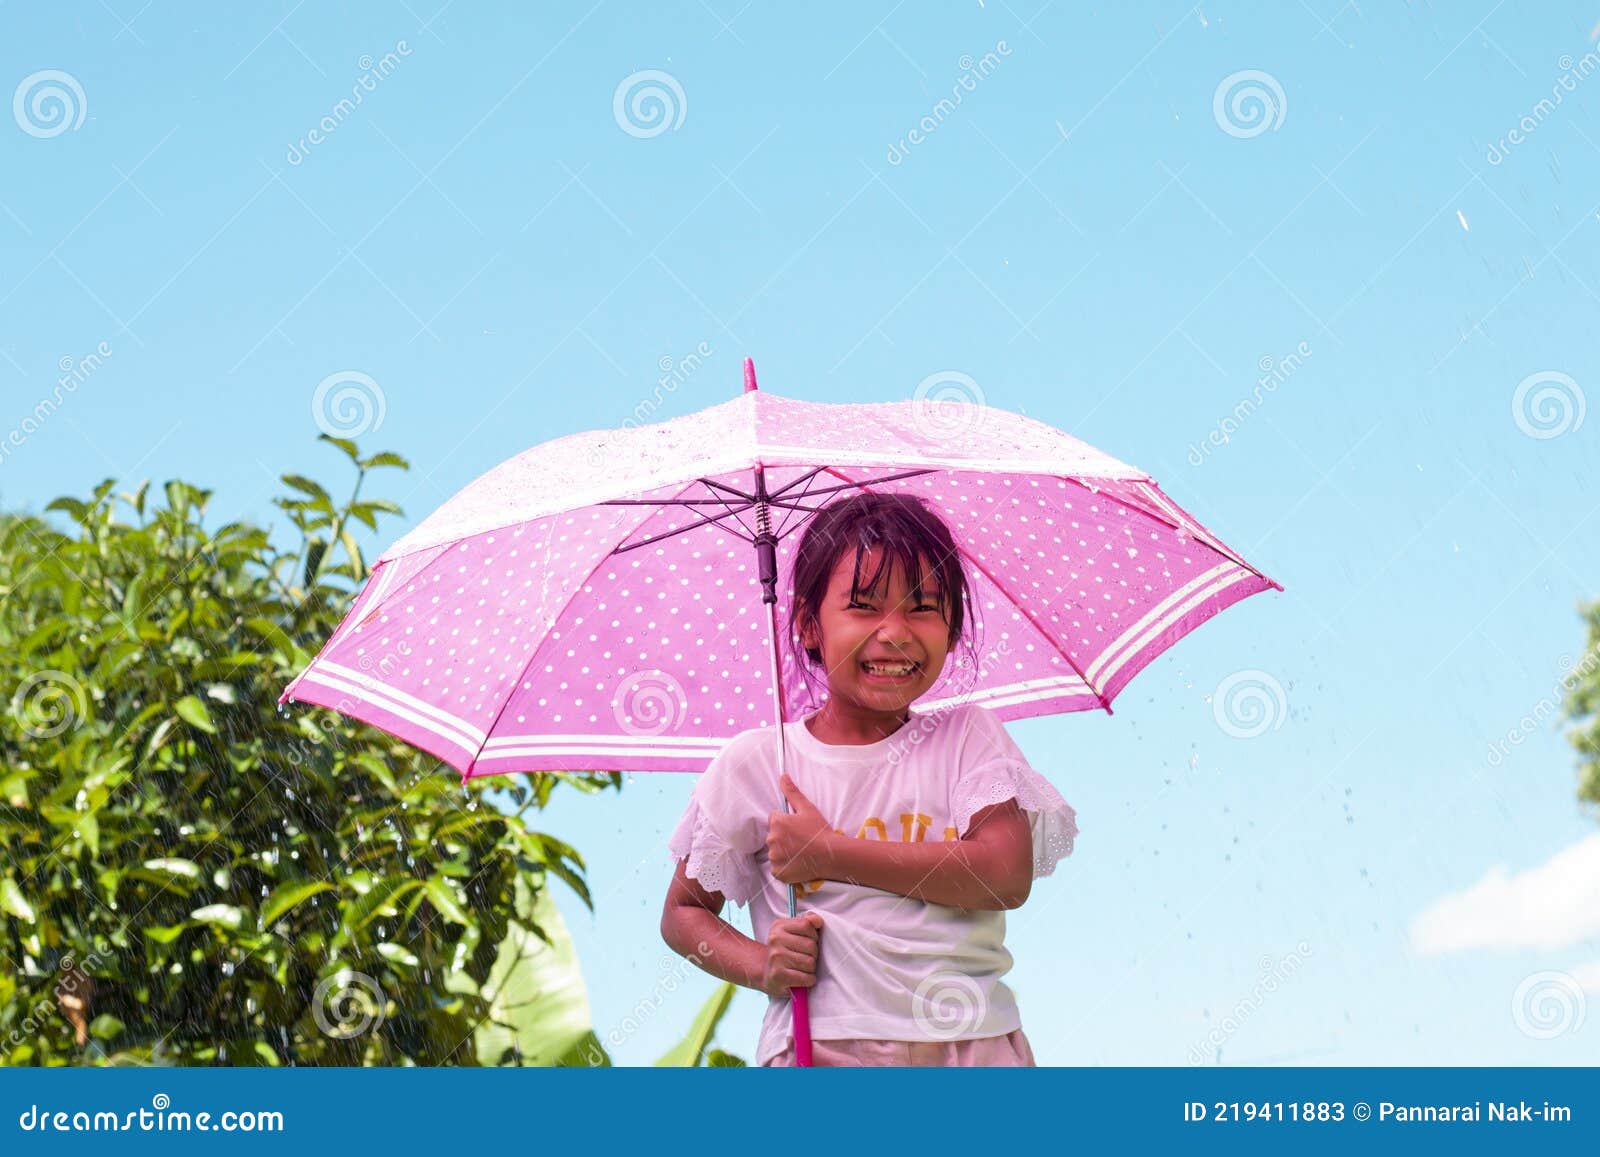 asian girl standing with an umbrella with joyfulness while it is raining and sunny during the day.